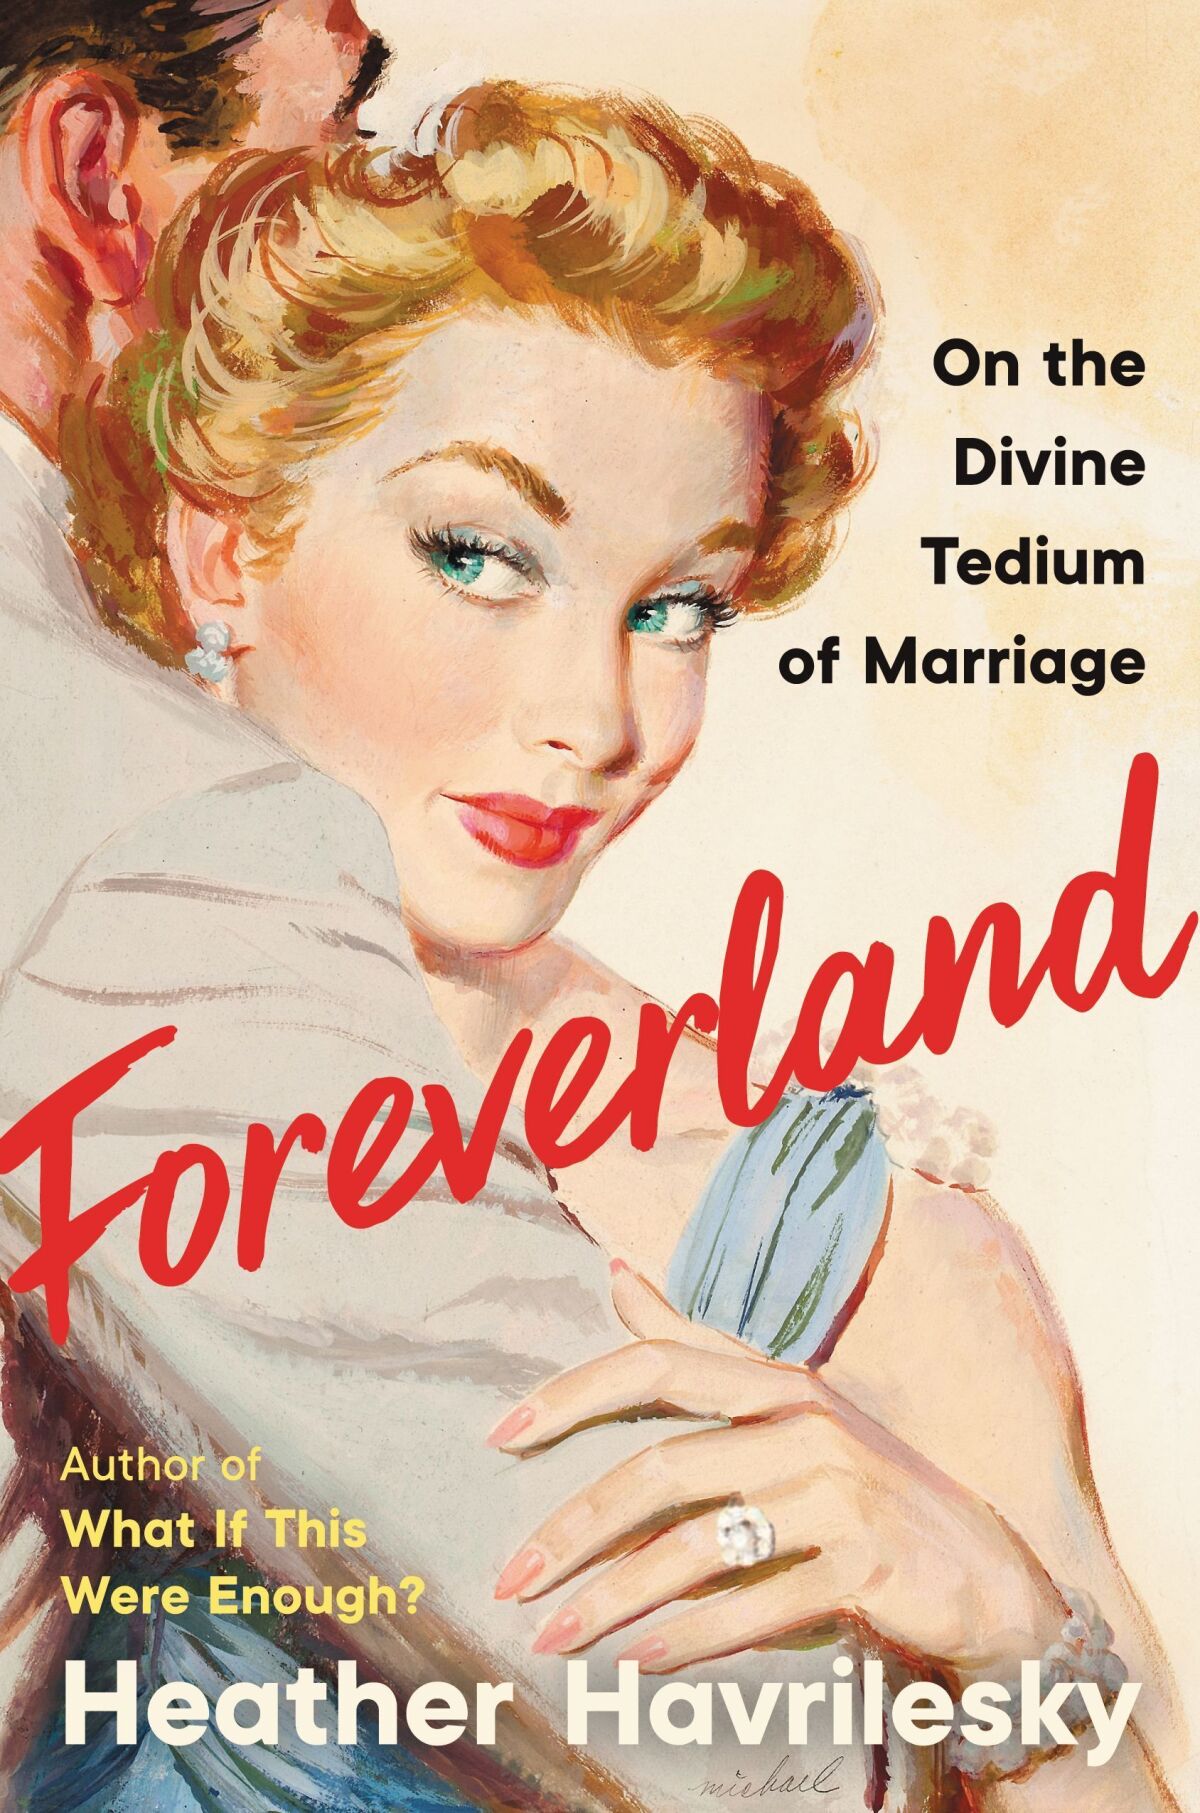 This cover image released b Ecco shows "Foreverland: On the Divine Tedium of Marriage" by Heather Havrilesky. (Ecco via AP)